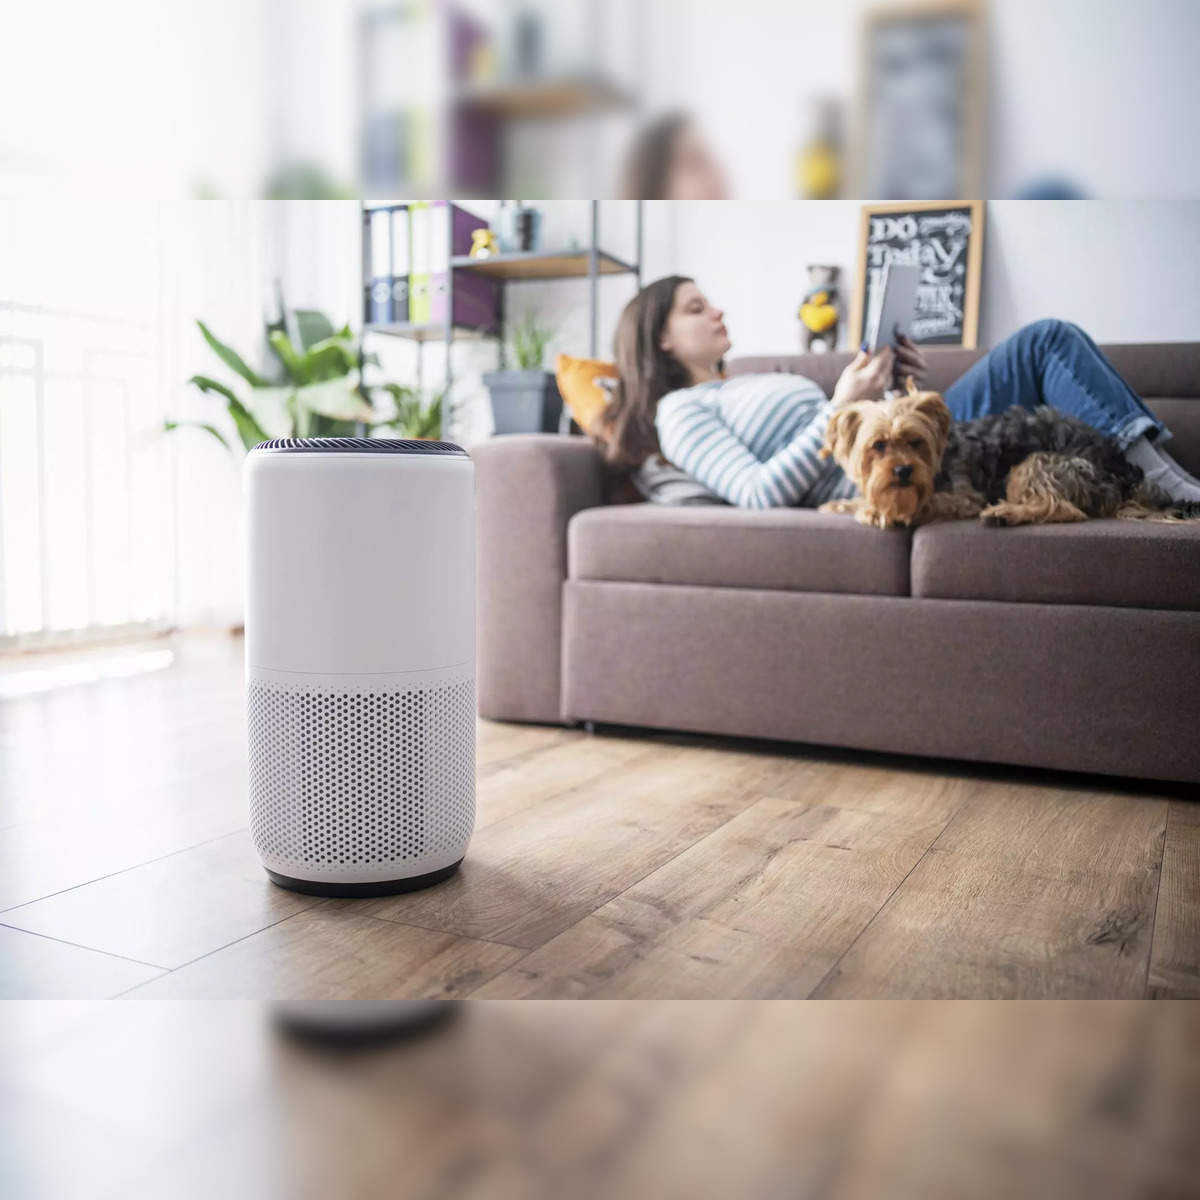 Xiaomi Air Purifiers for Home Bedroom, Allergen Removal, Smart WiFi Alexa,  Large Room Air Purifier Ultra Quiet Auto, PM2.5 Air Quality, HEPA Filter